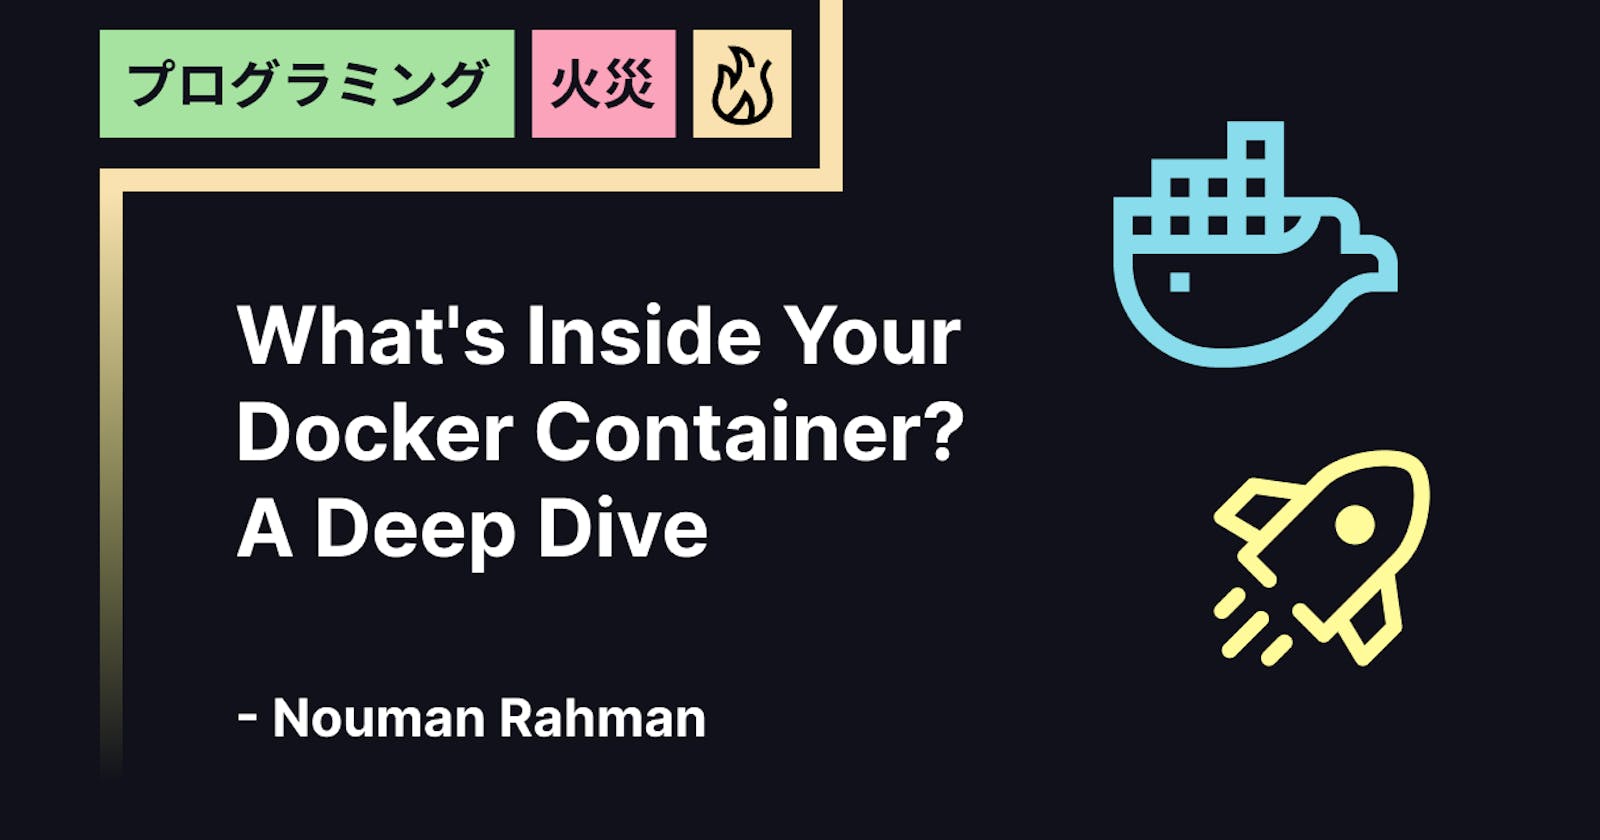 What's Inside Your Docker Container? A Deep Dive